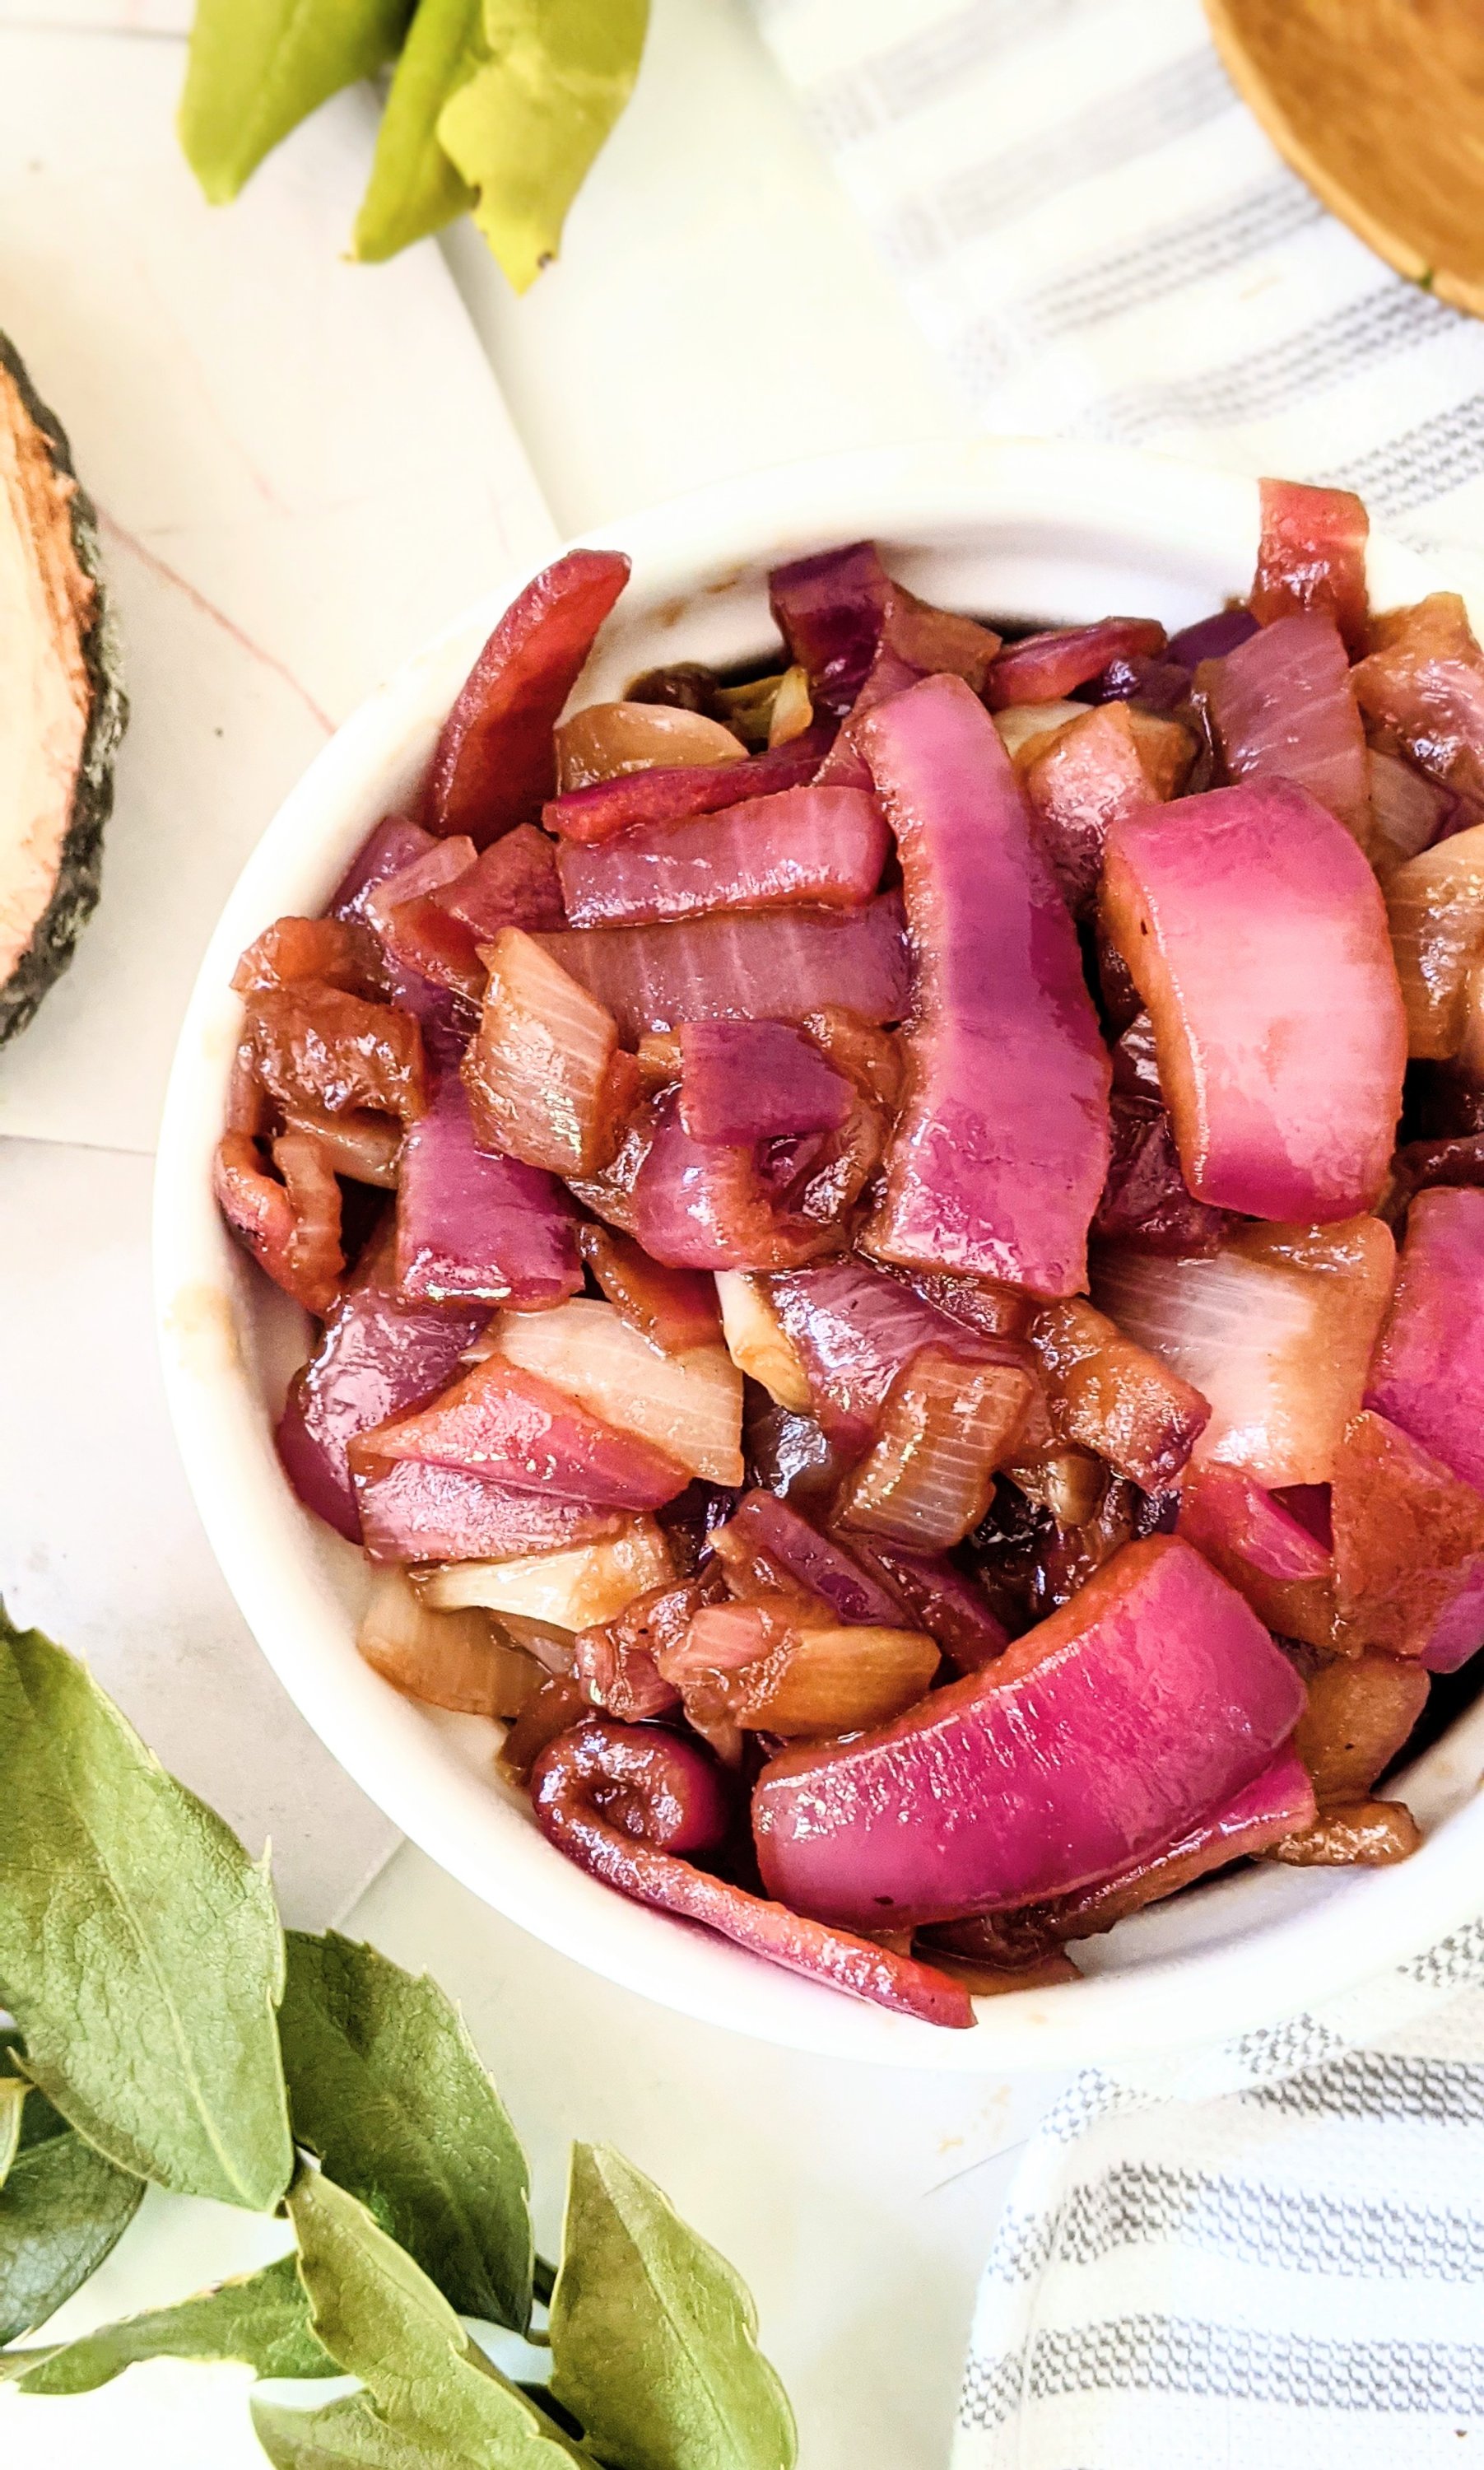 caramelized red onions for burgers frisco melts or grilled cheeses, caramelized onions for tacos or fajitas vegan gluten free vegetarian sweet caramelized red onion recipes